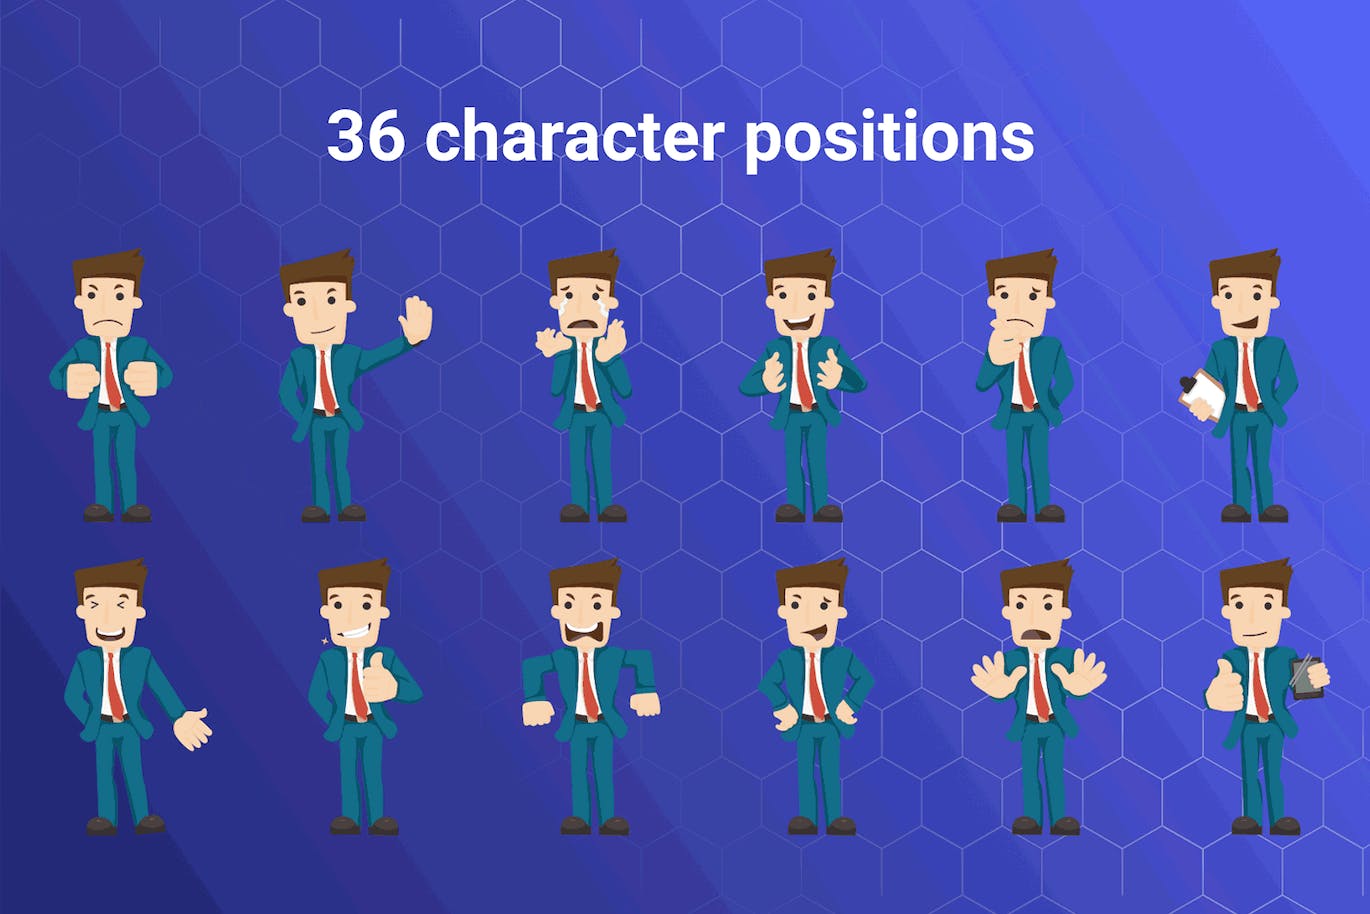 Image with different character positions.